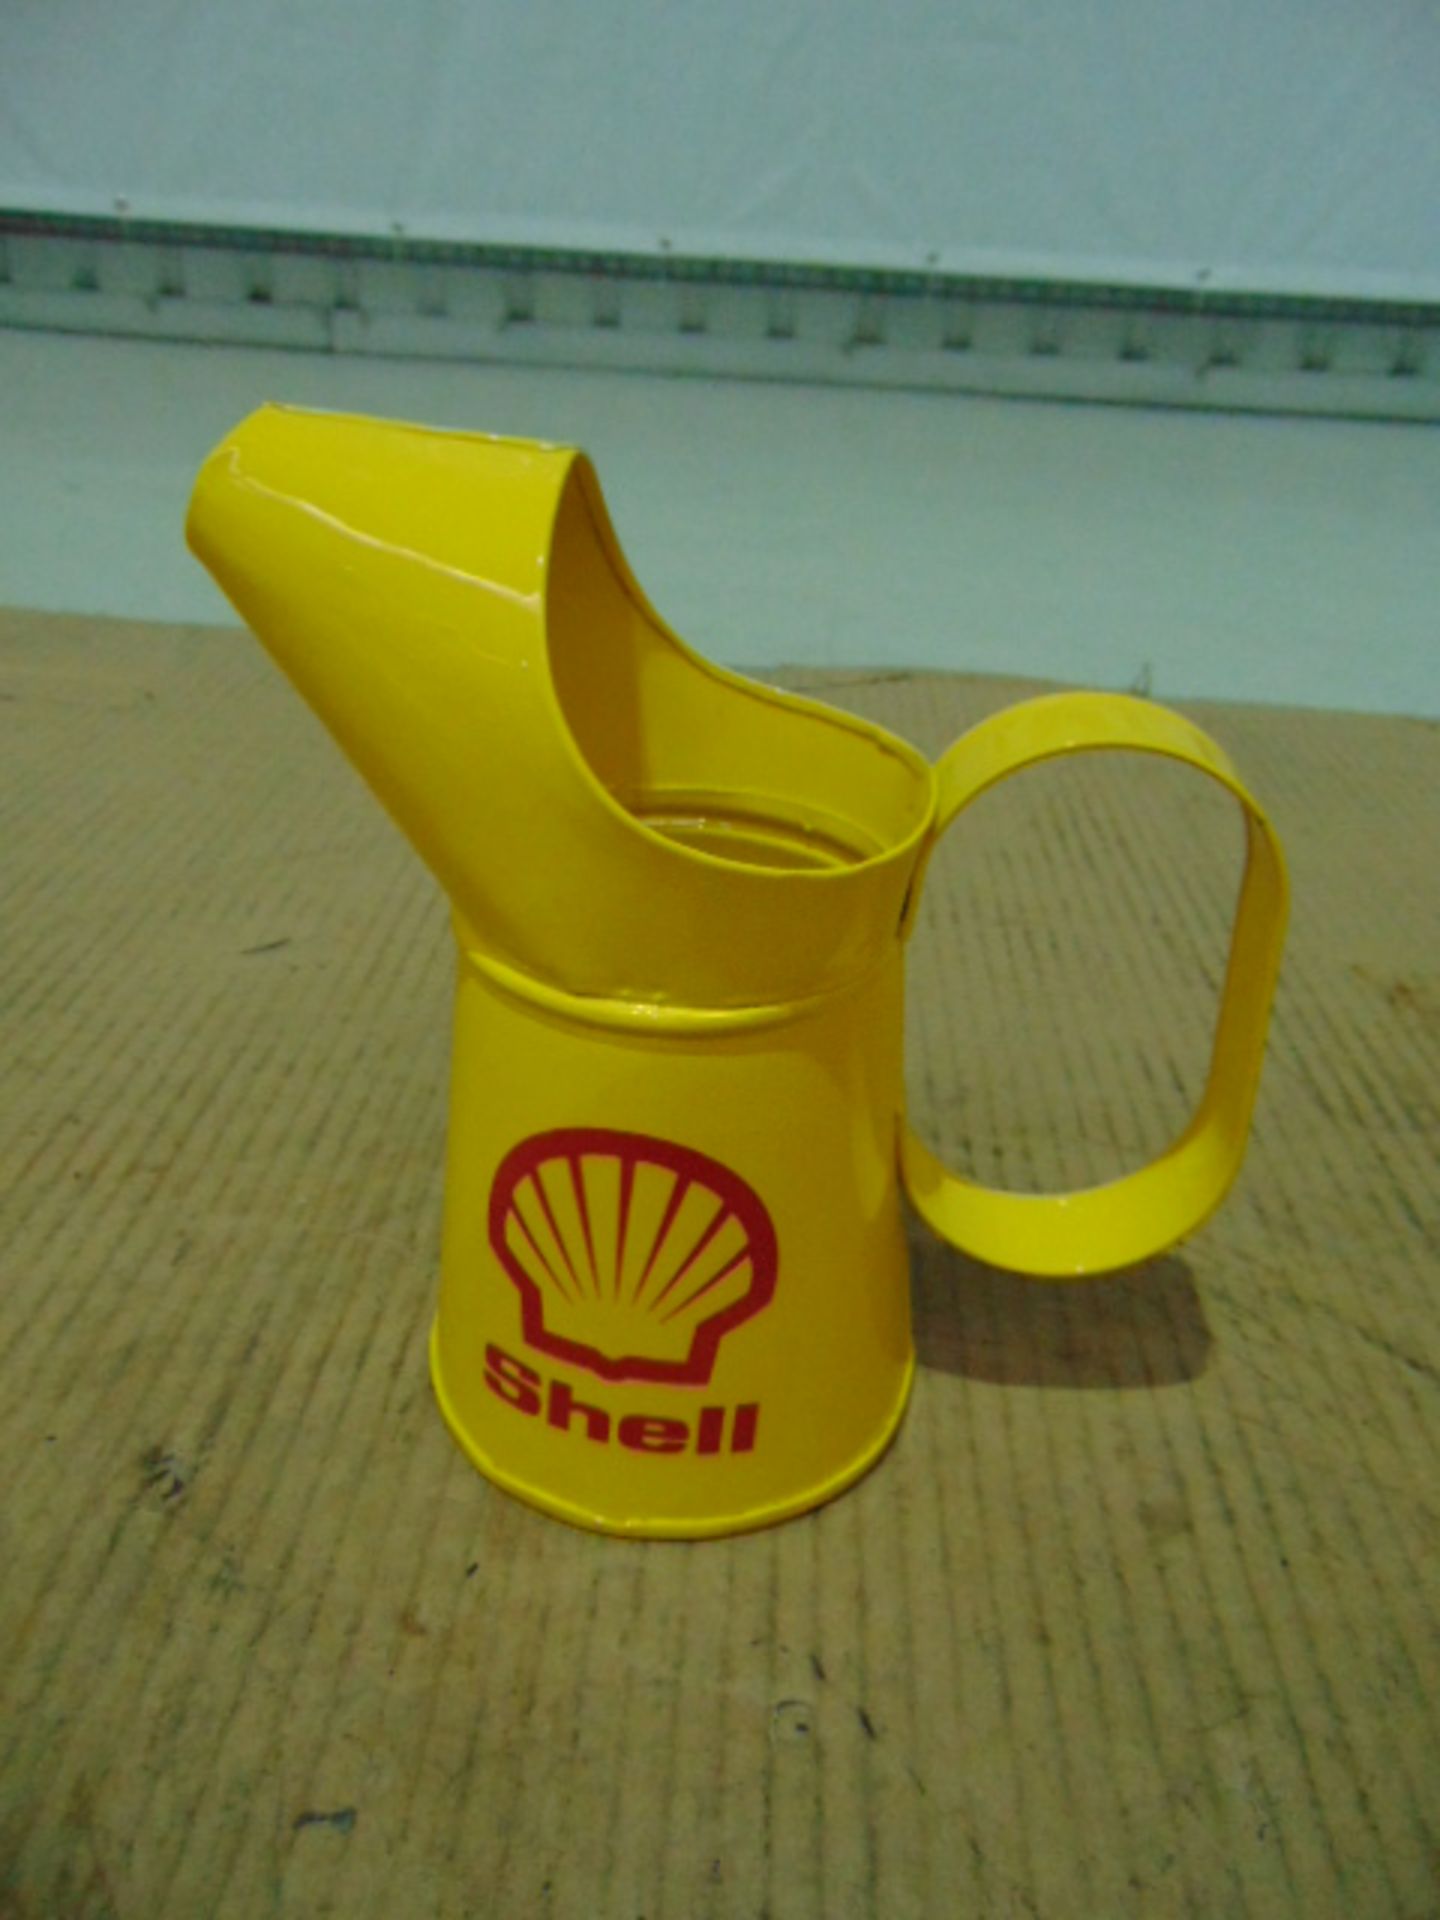 Set of 5 x Shell Branded Mixed Size Oil Pourer Cans - Bild 5 aus 8